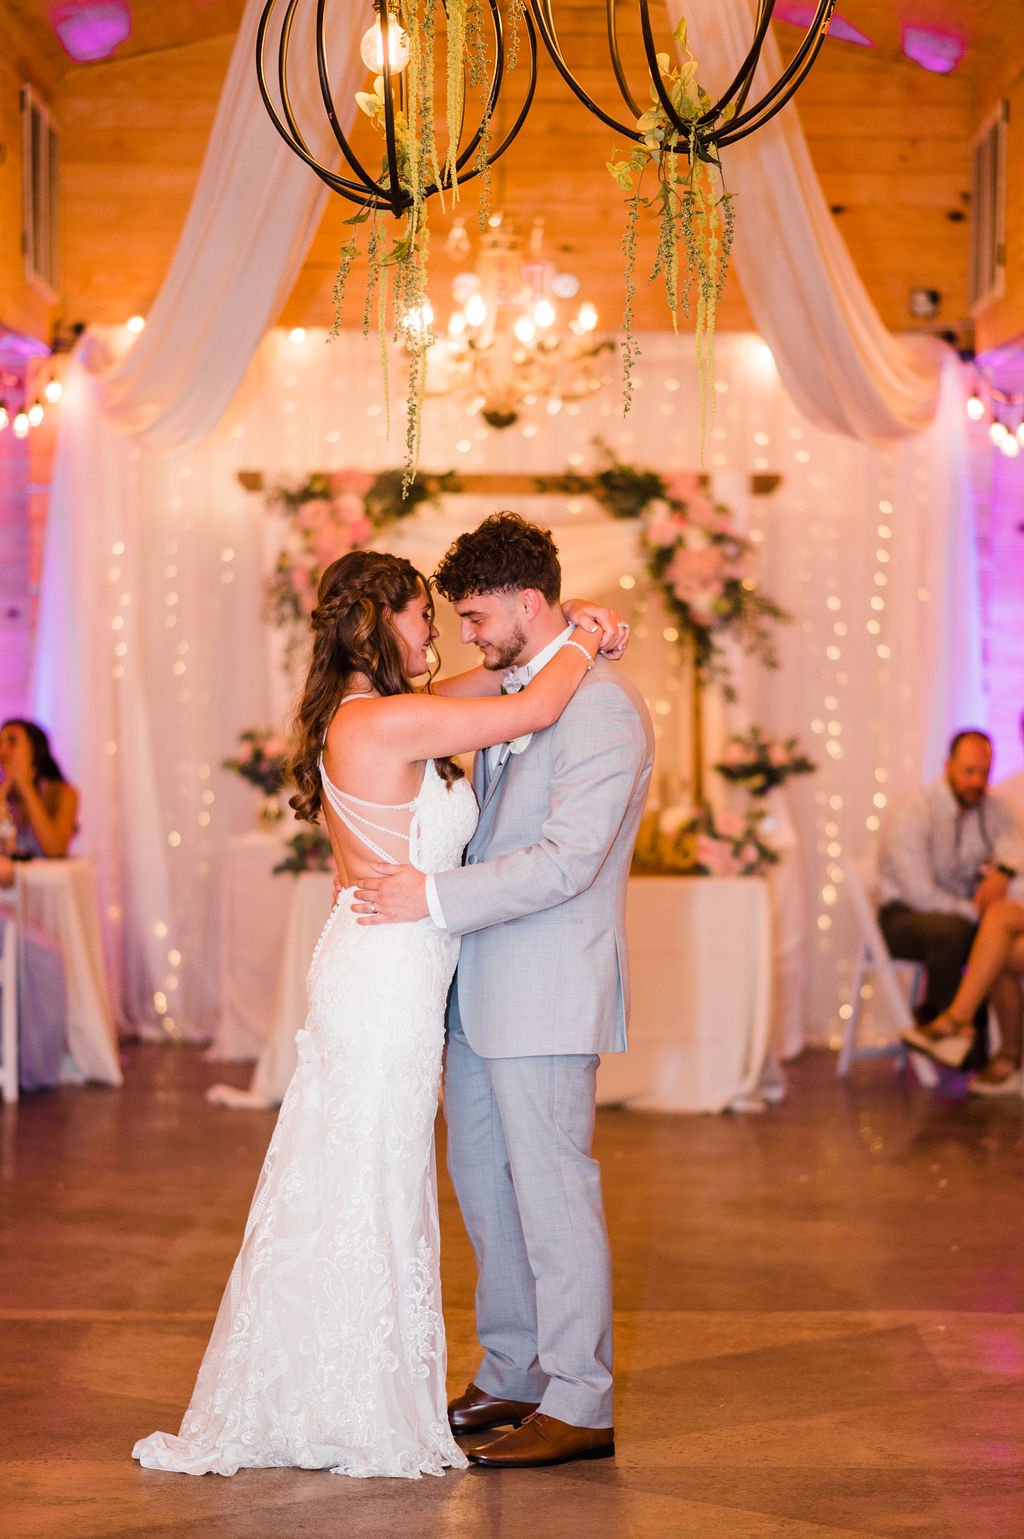  couple’s first dance at barn wedding venue in Fayetteville NC 